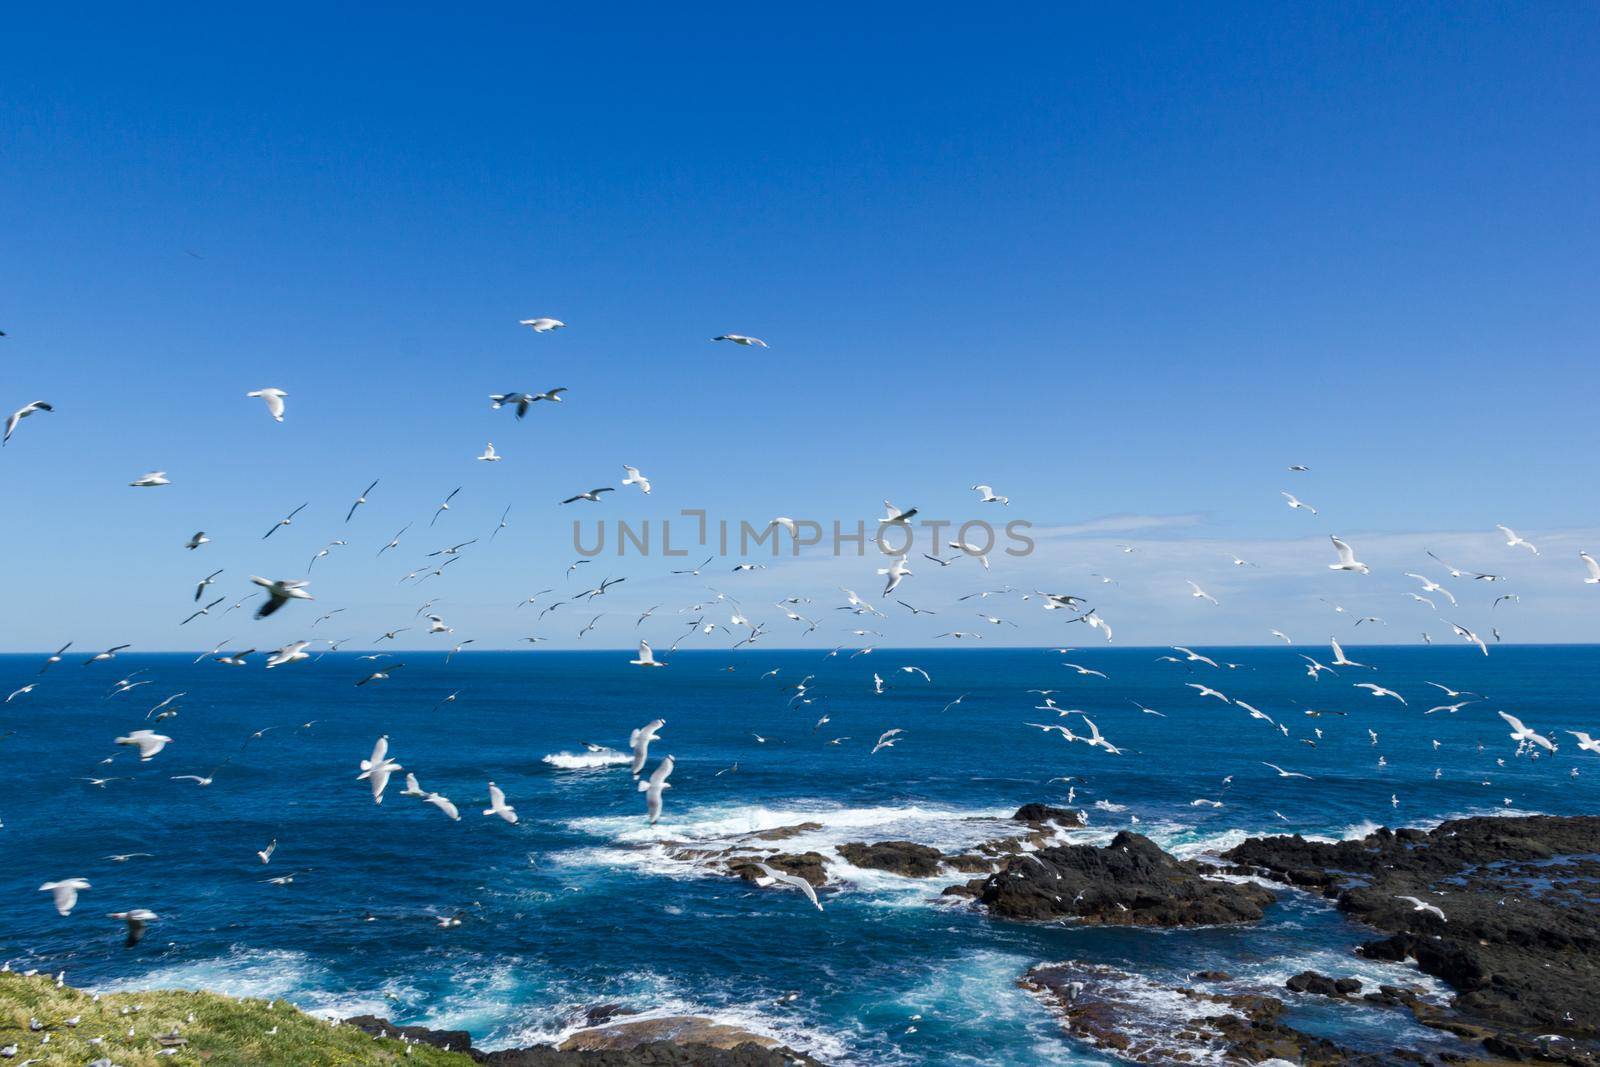 hundrets of flying gulls at The Nobbies , Philip Island, Victoria, Australia by bettercallcurry